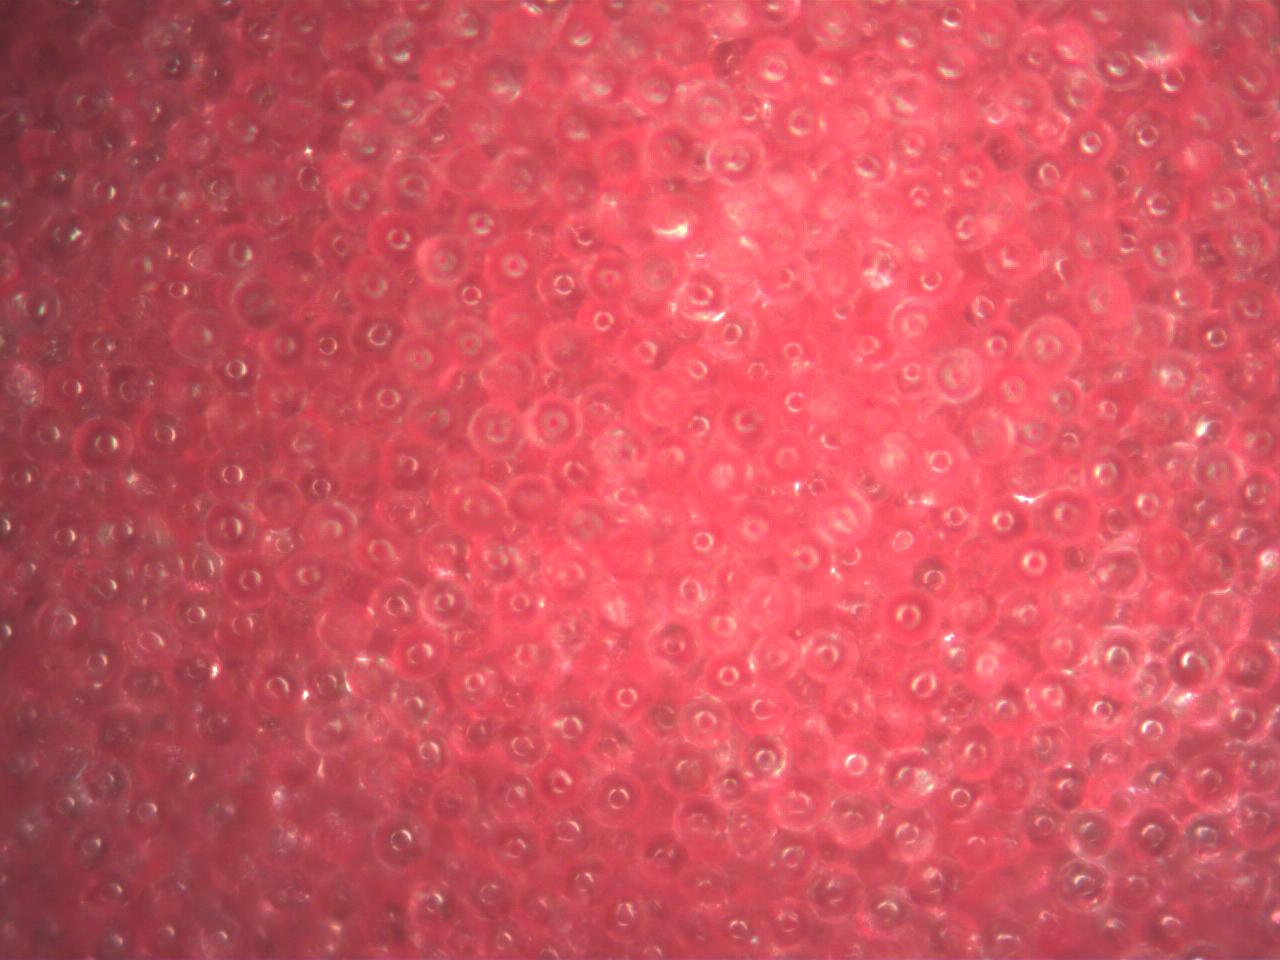 Red Fluorescent Hemispherical Coating on Solid Glass Microspheres 45-53 micron - 100X magnification